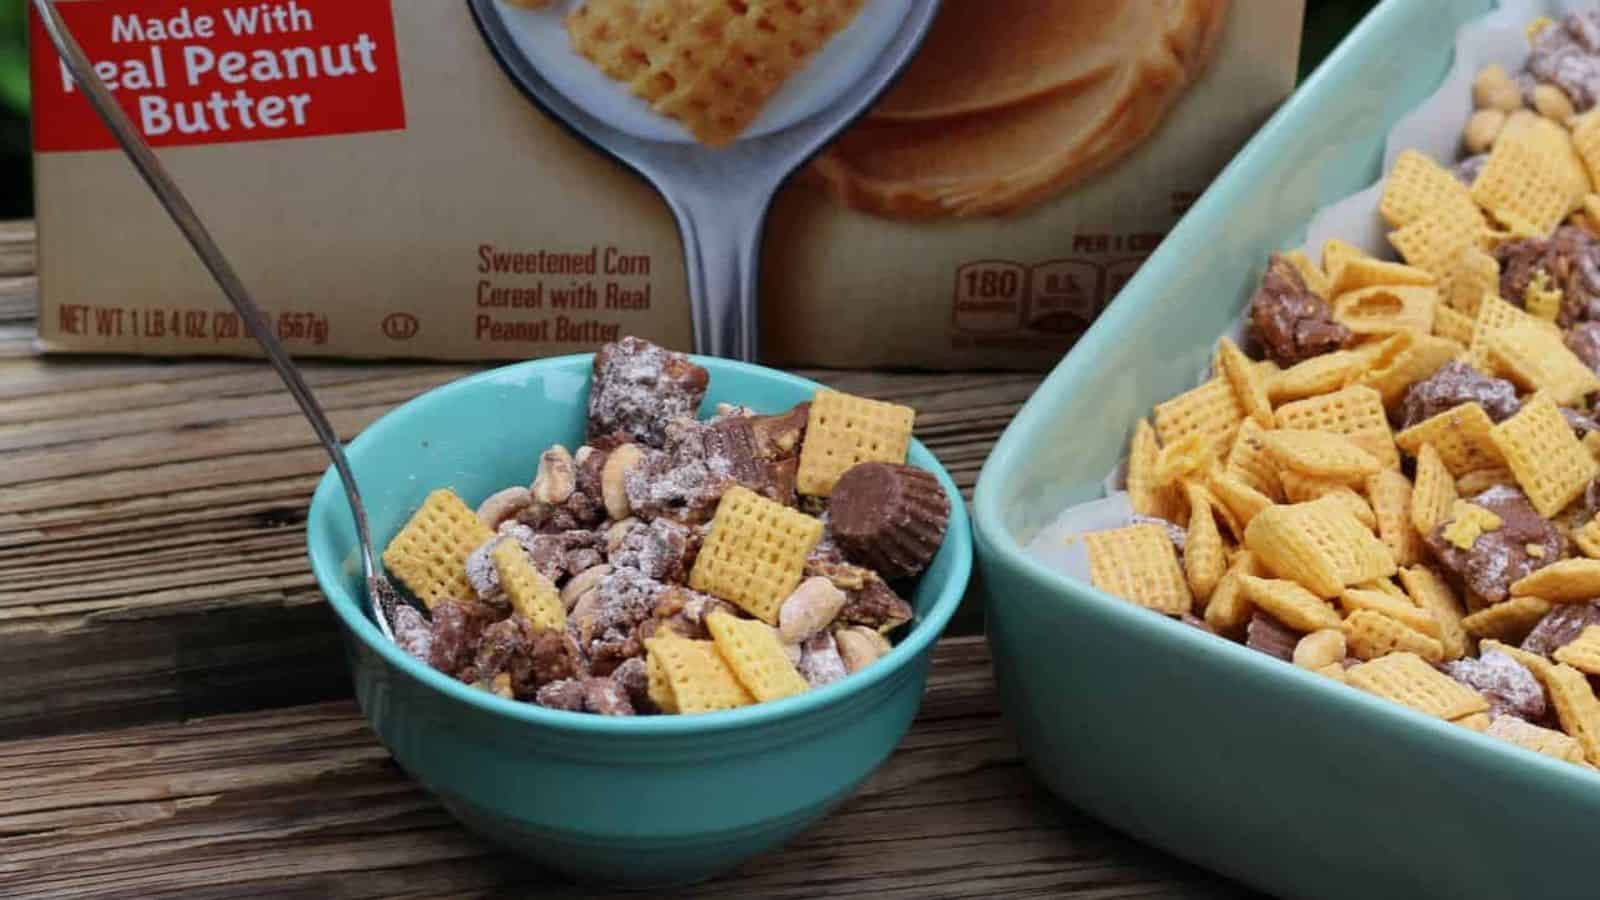 Teal bowl of chex party mix next to a cereal box and casserole dish.